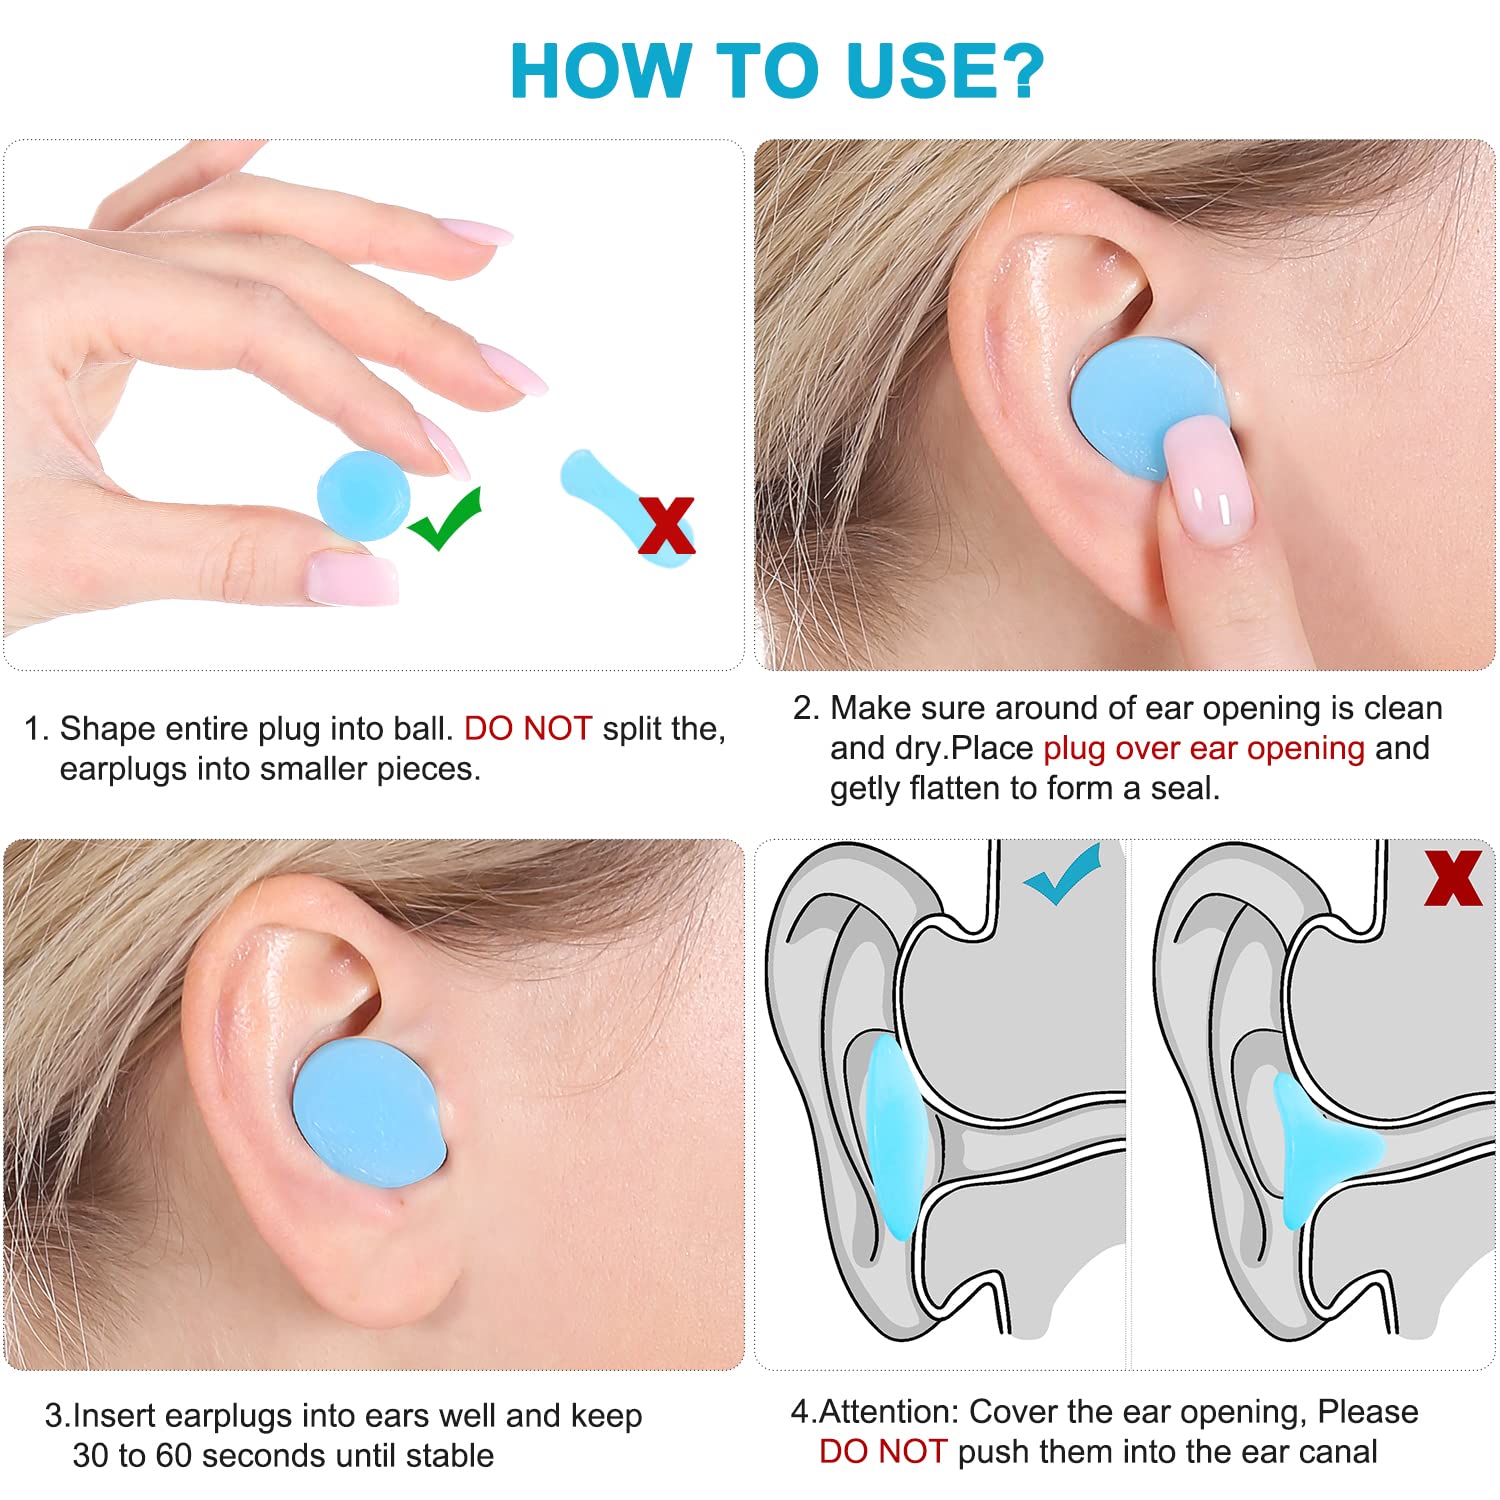 Reusable Silicone Ear Plugs, Waterproof Noise Cancelling EarPlugs for Sleeping, Mowing, Swimming, Airplanes, Concerts, 22dB Highest NRR